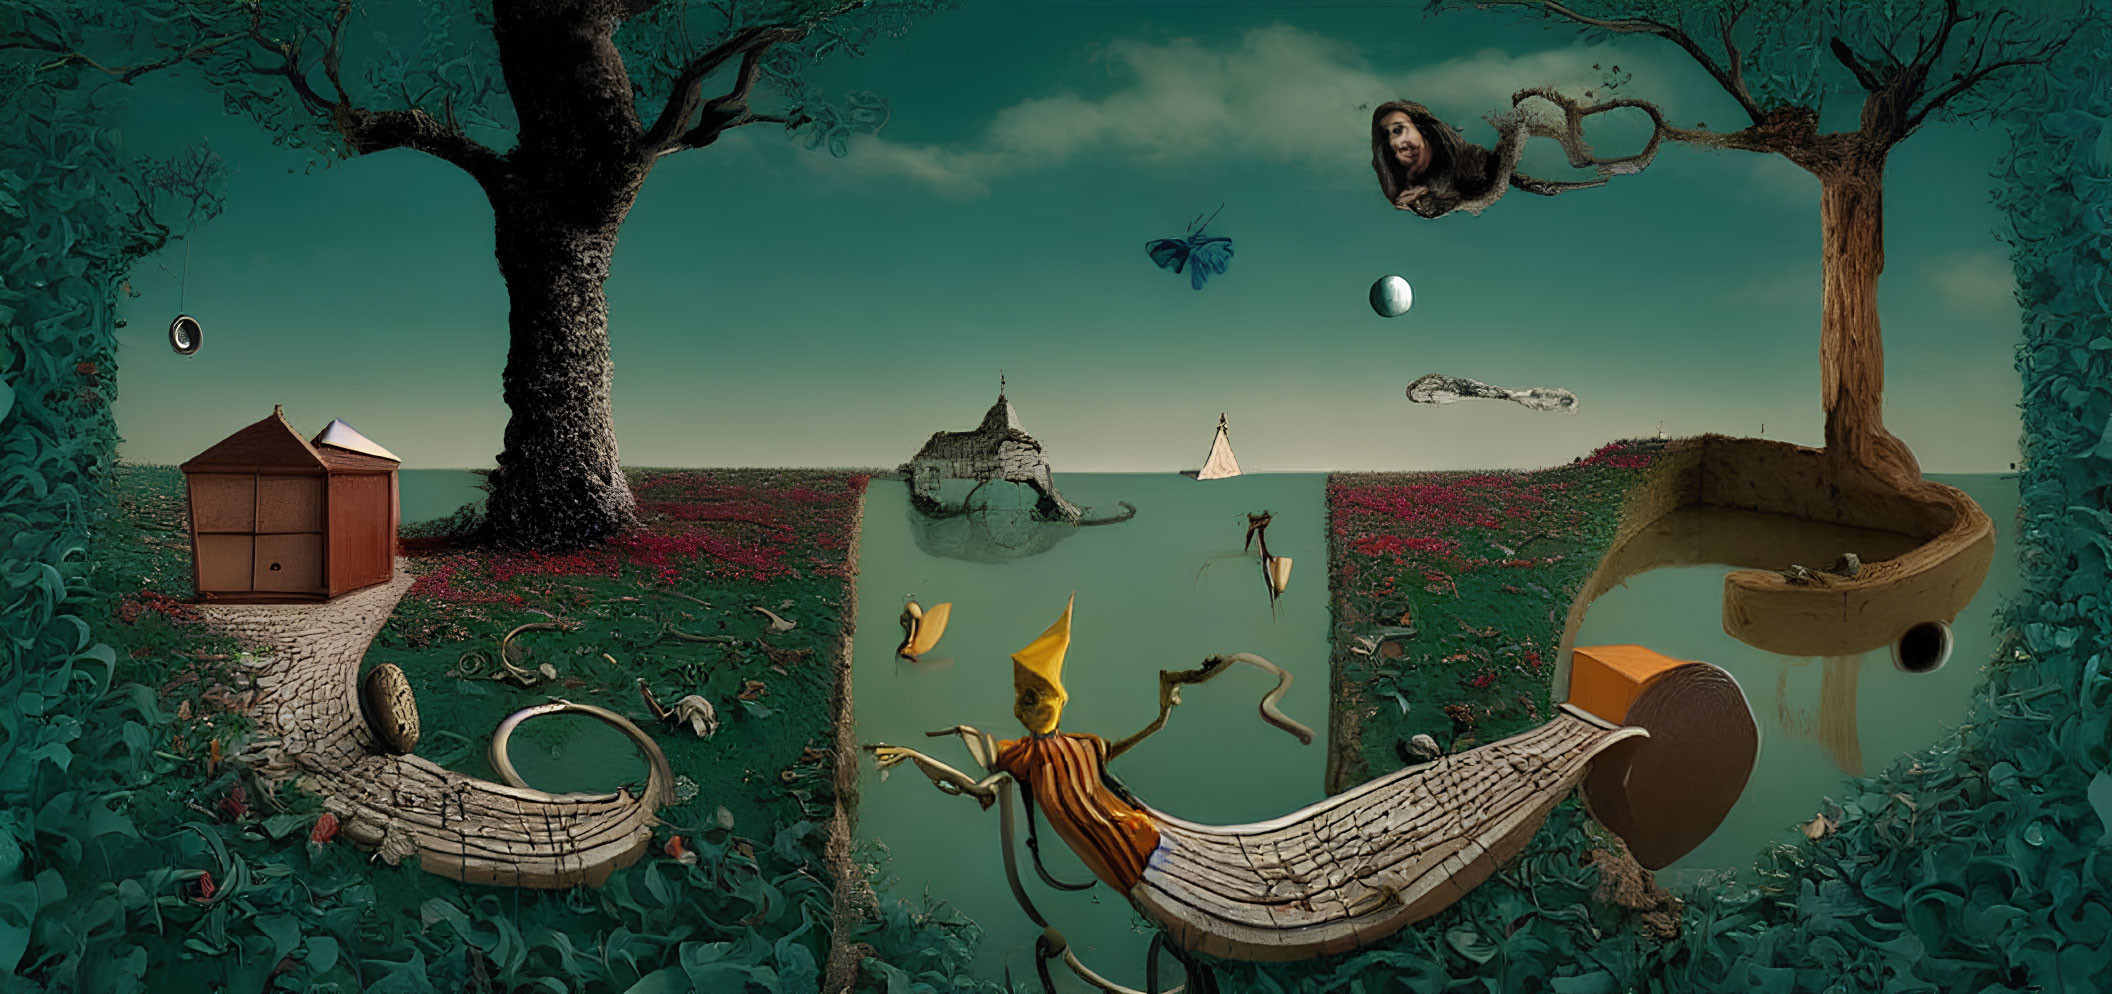 Surreal landscape with floating elements, woman in circular frame, boats, and house